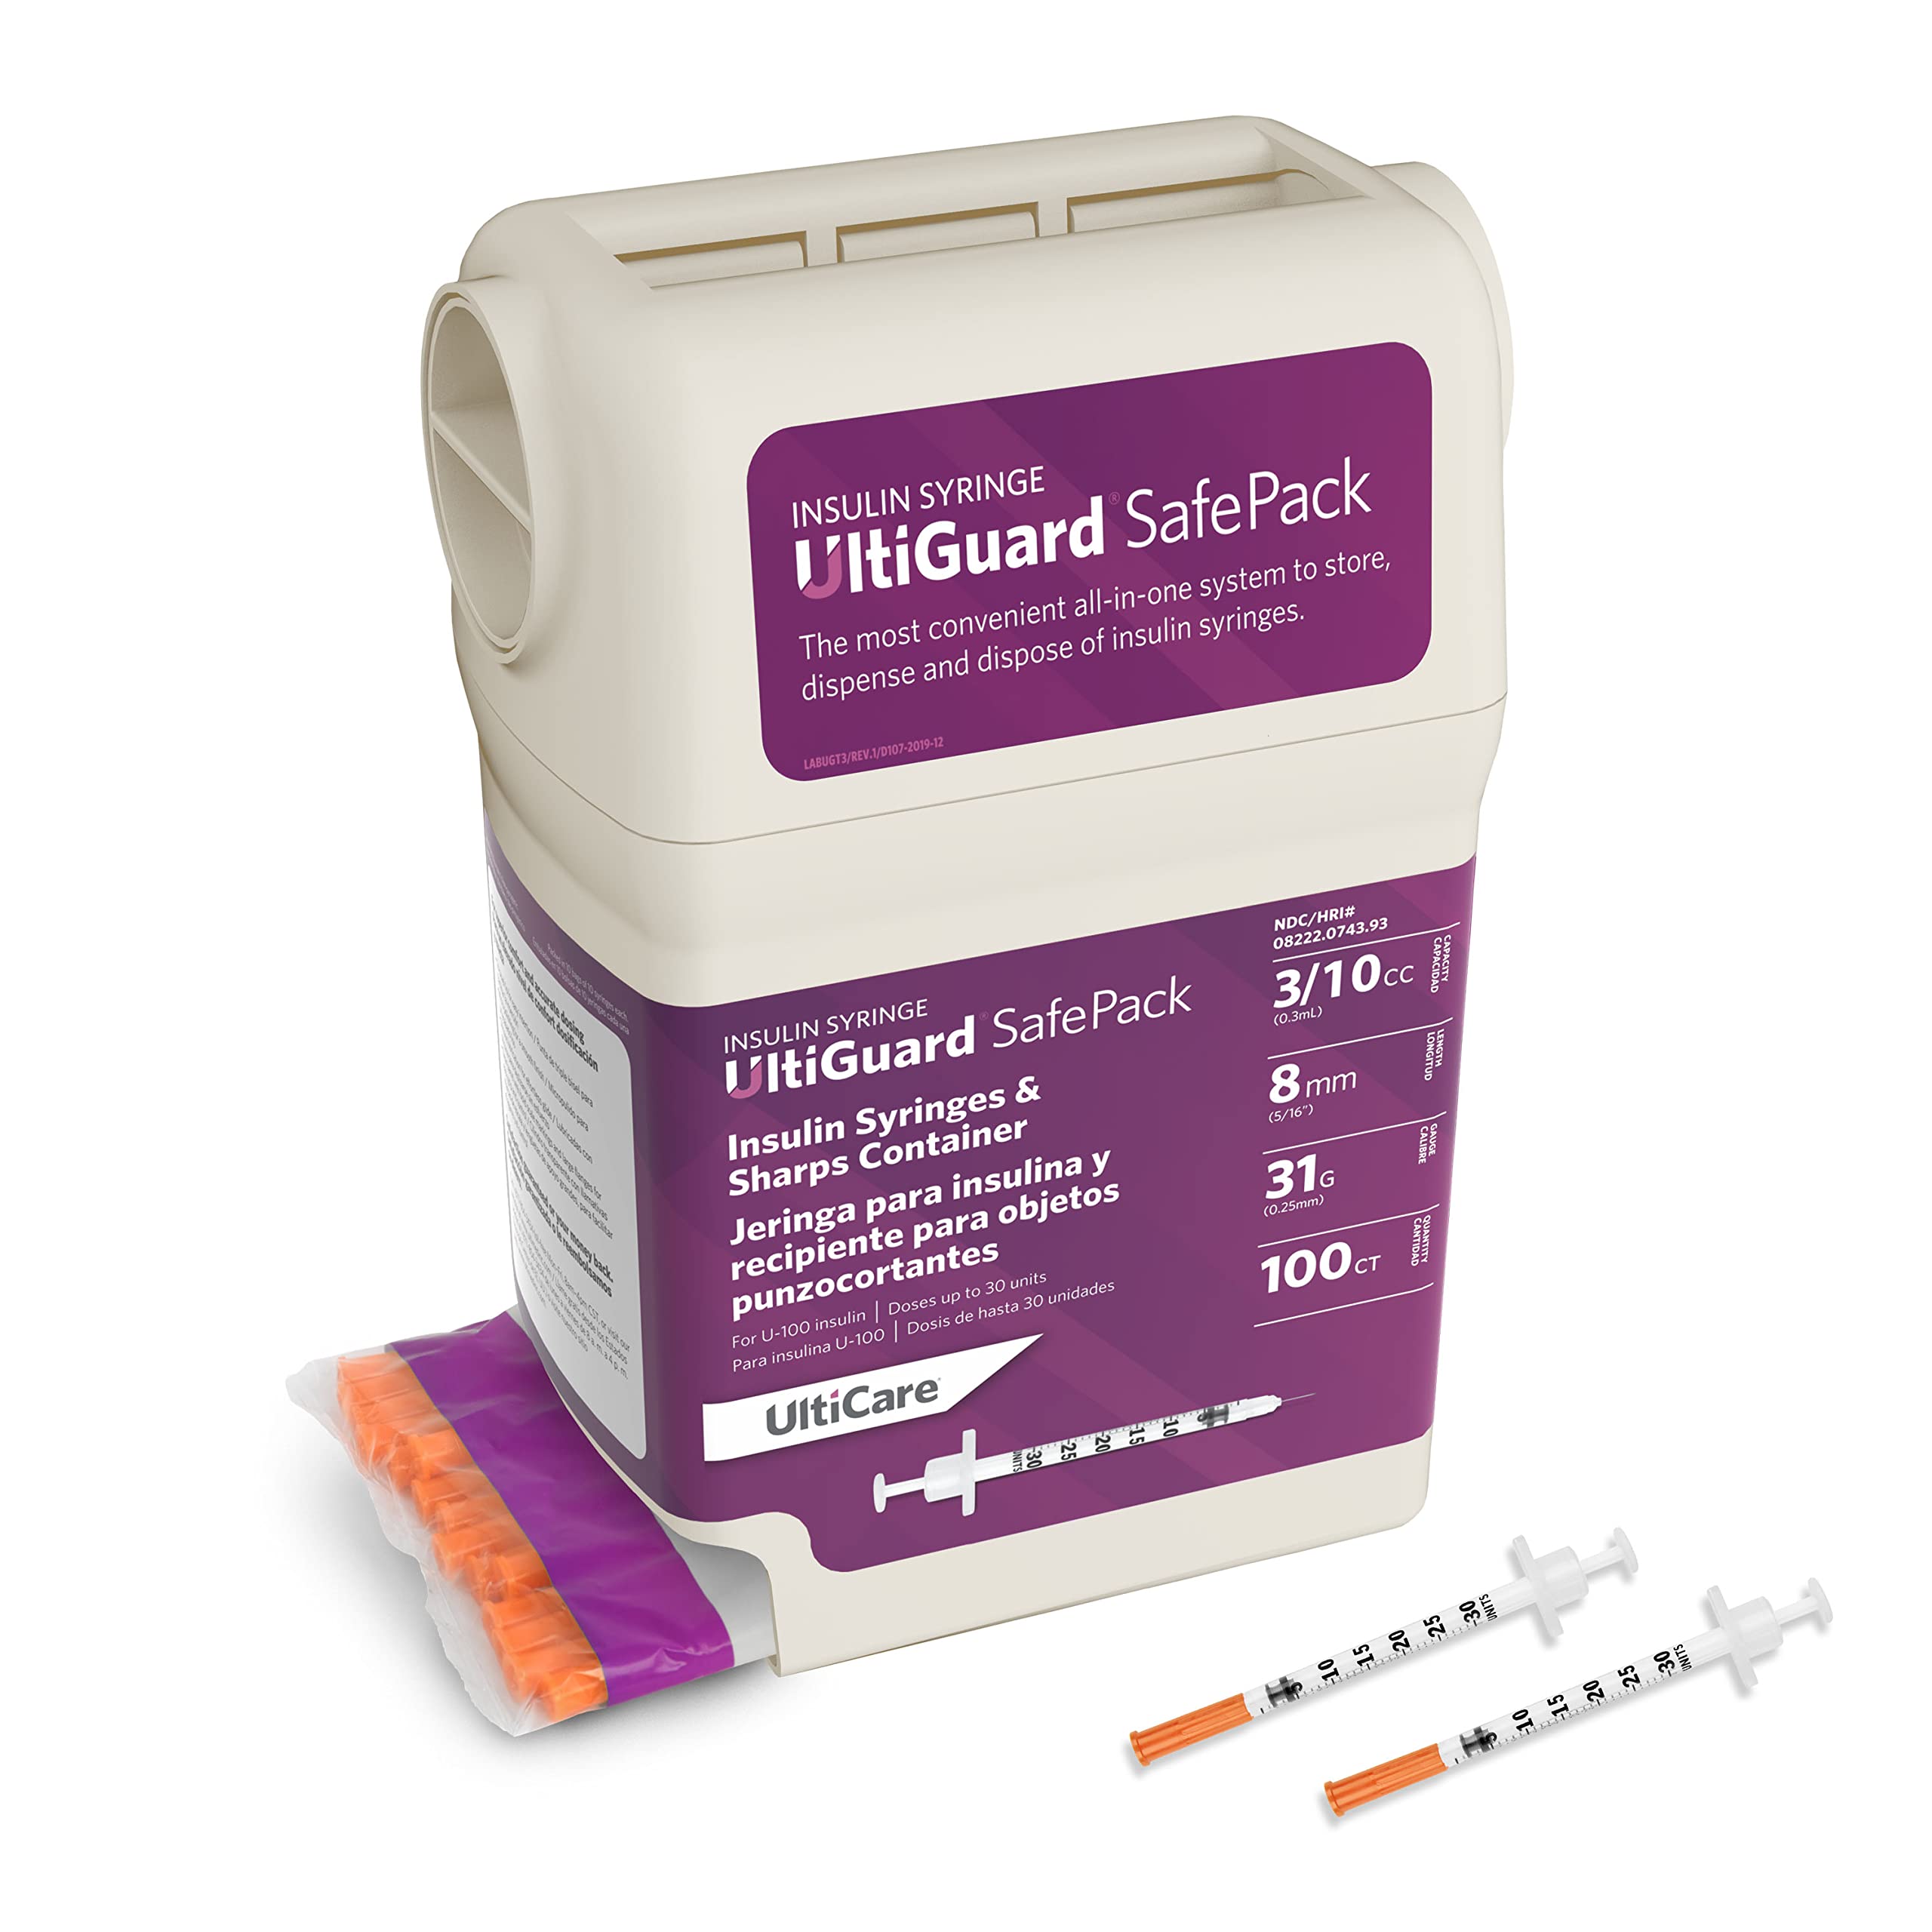 All-in-One UltiGuard Safe Pack U-100 Insulin Syringes and Sharps Container for at-Home Insulin Injections and Safe Needle Disposal; Size: 3/10cc, 31G x 5/16 (8mm), 100 Count